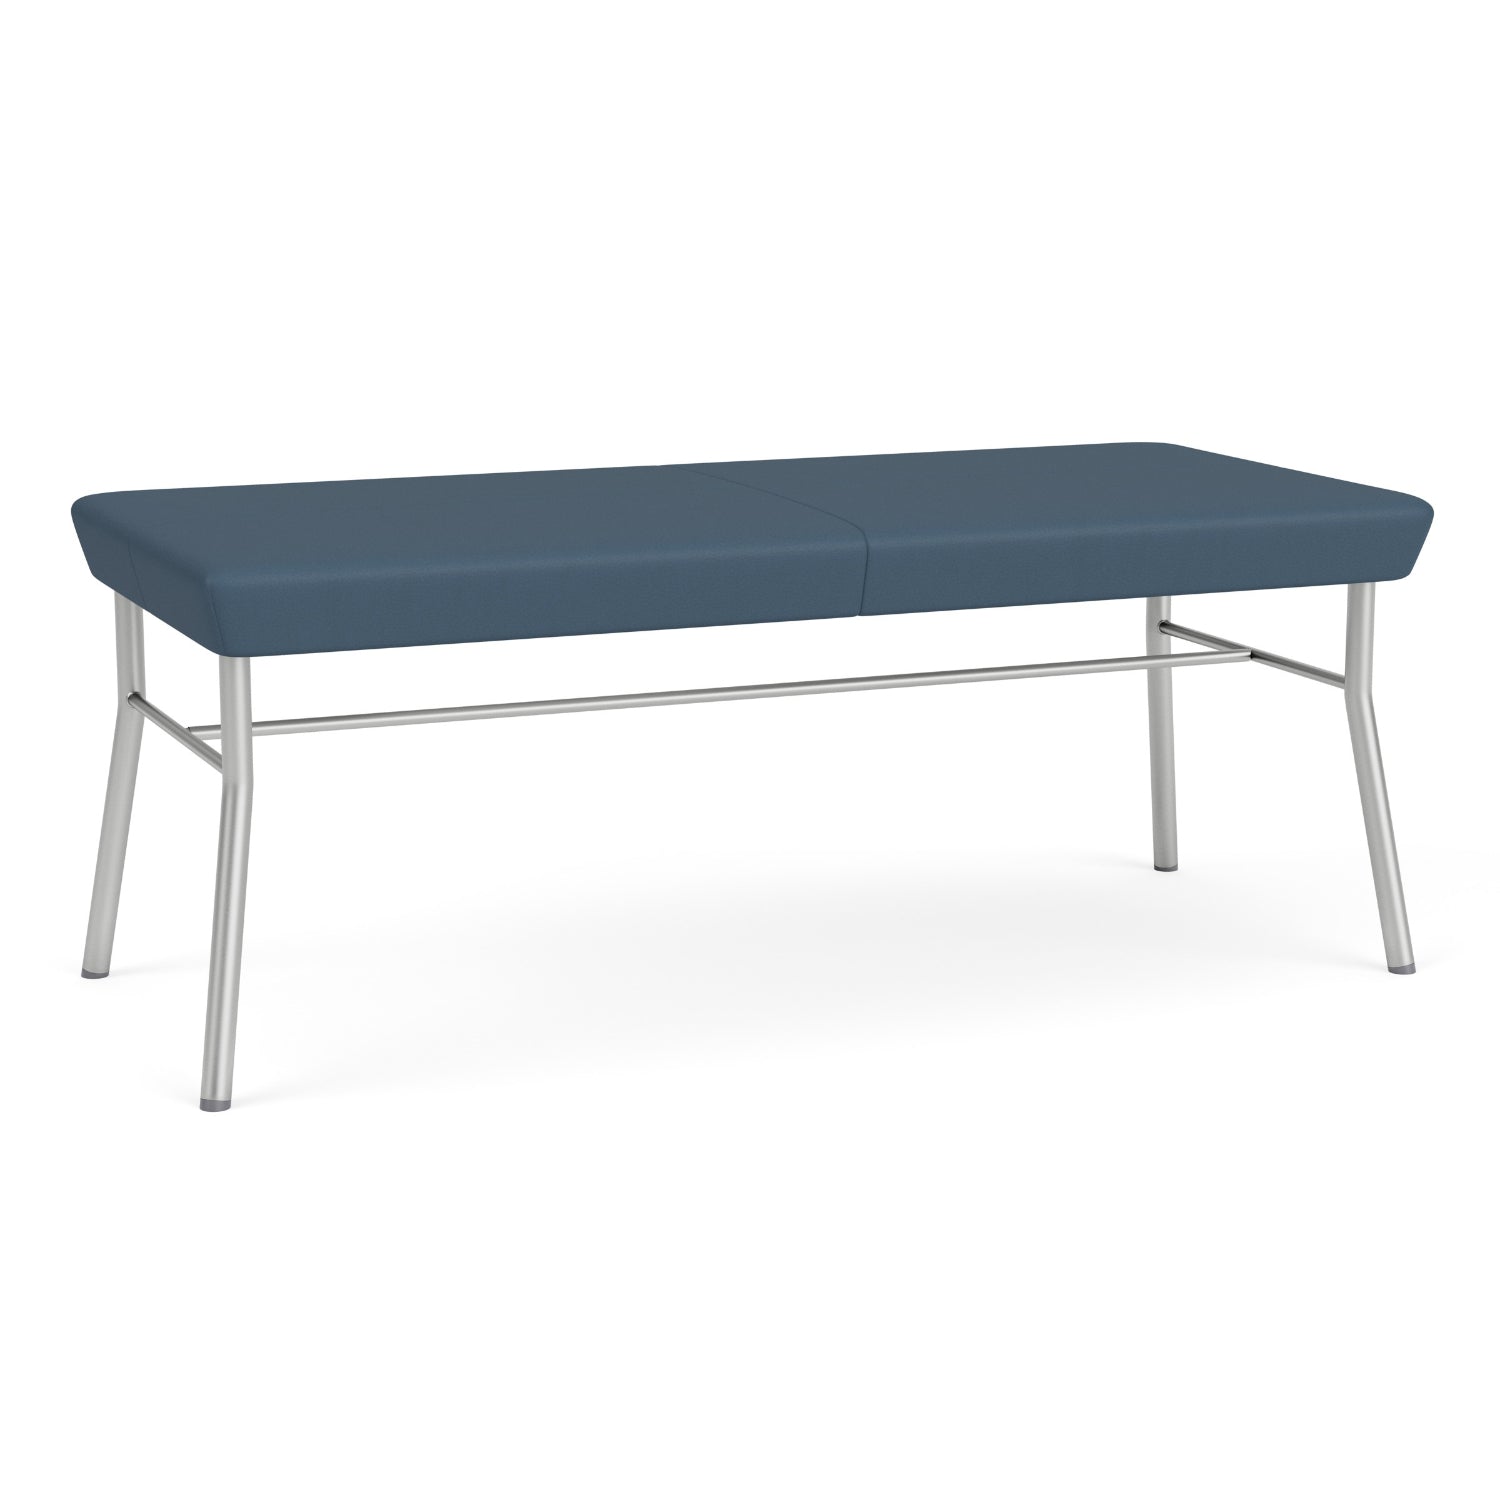 Mystic Guest Collection Reception Seating, 2 Seat Bench, Standard Vinyl Upholstery, FREE SHIPPING